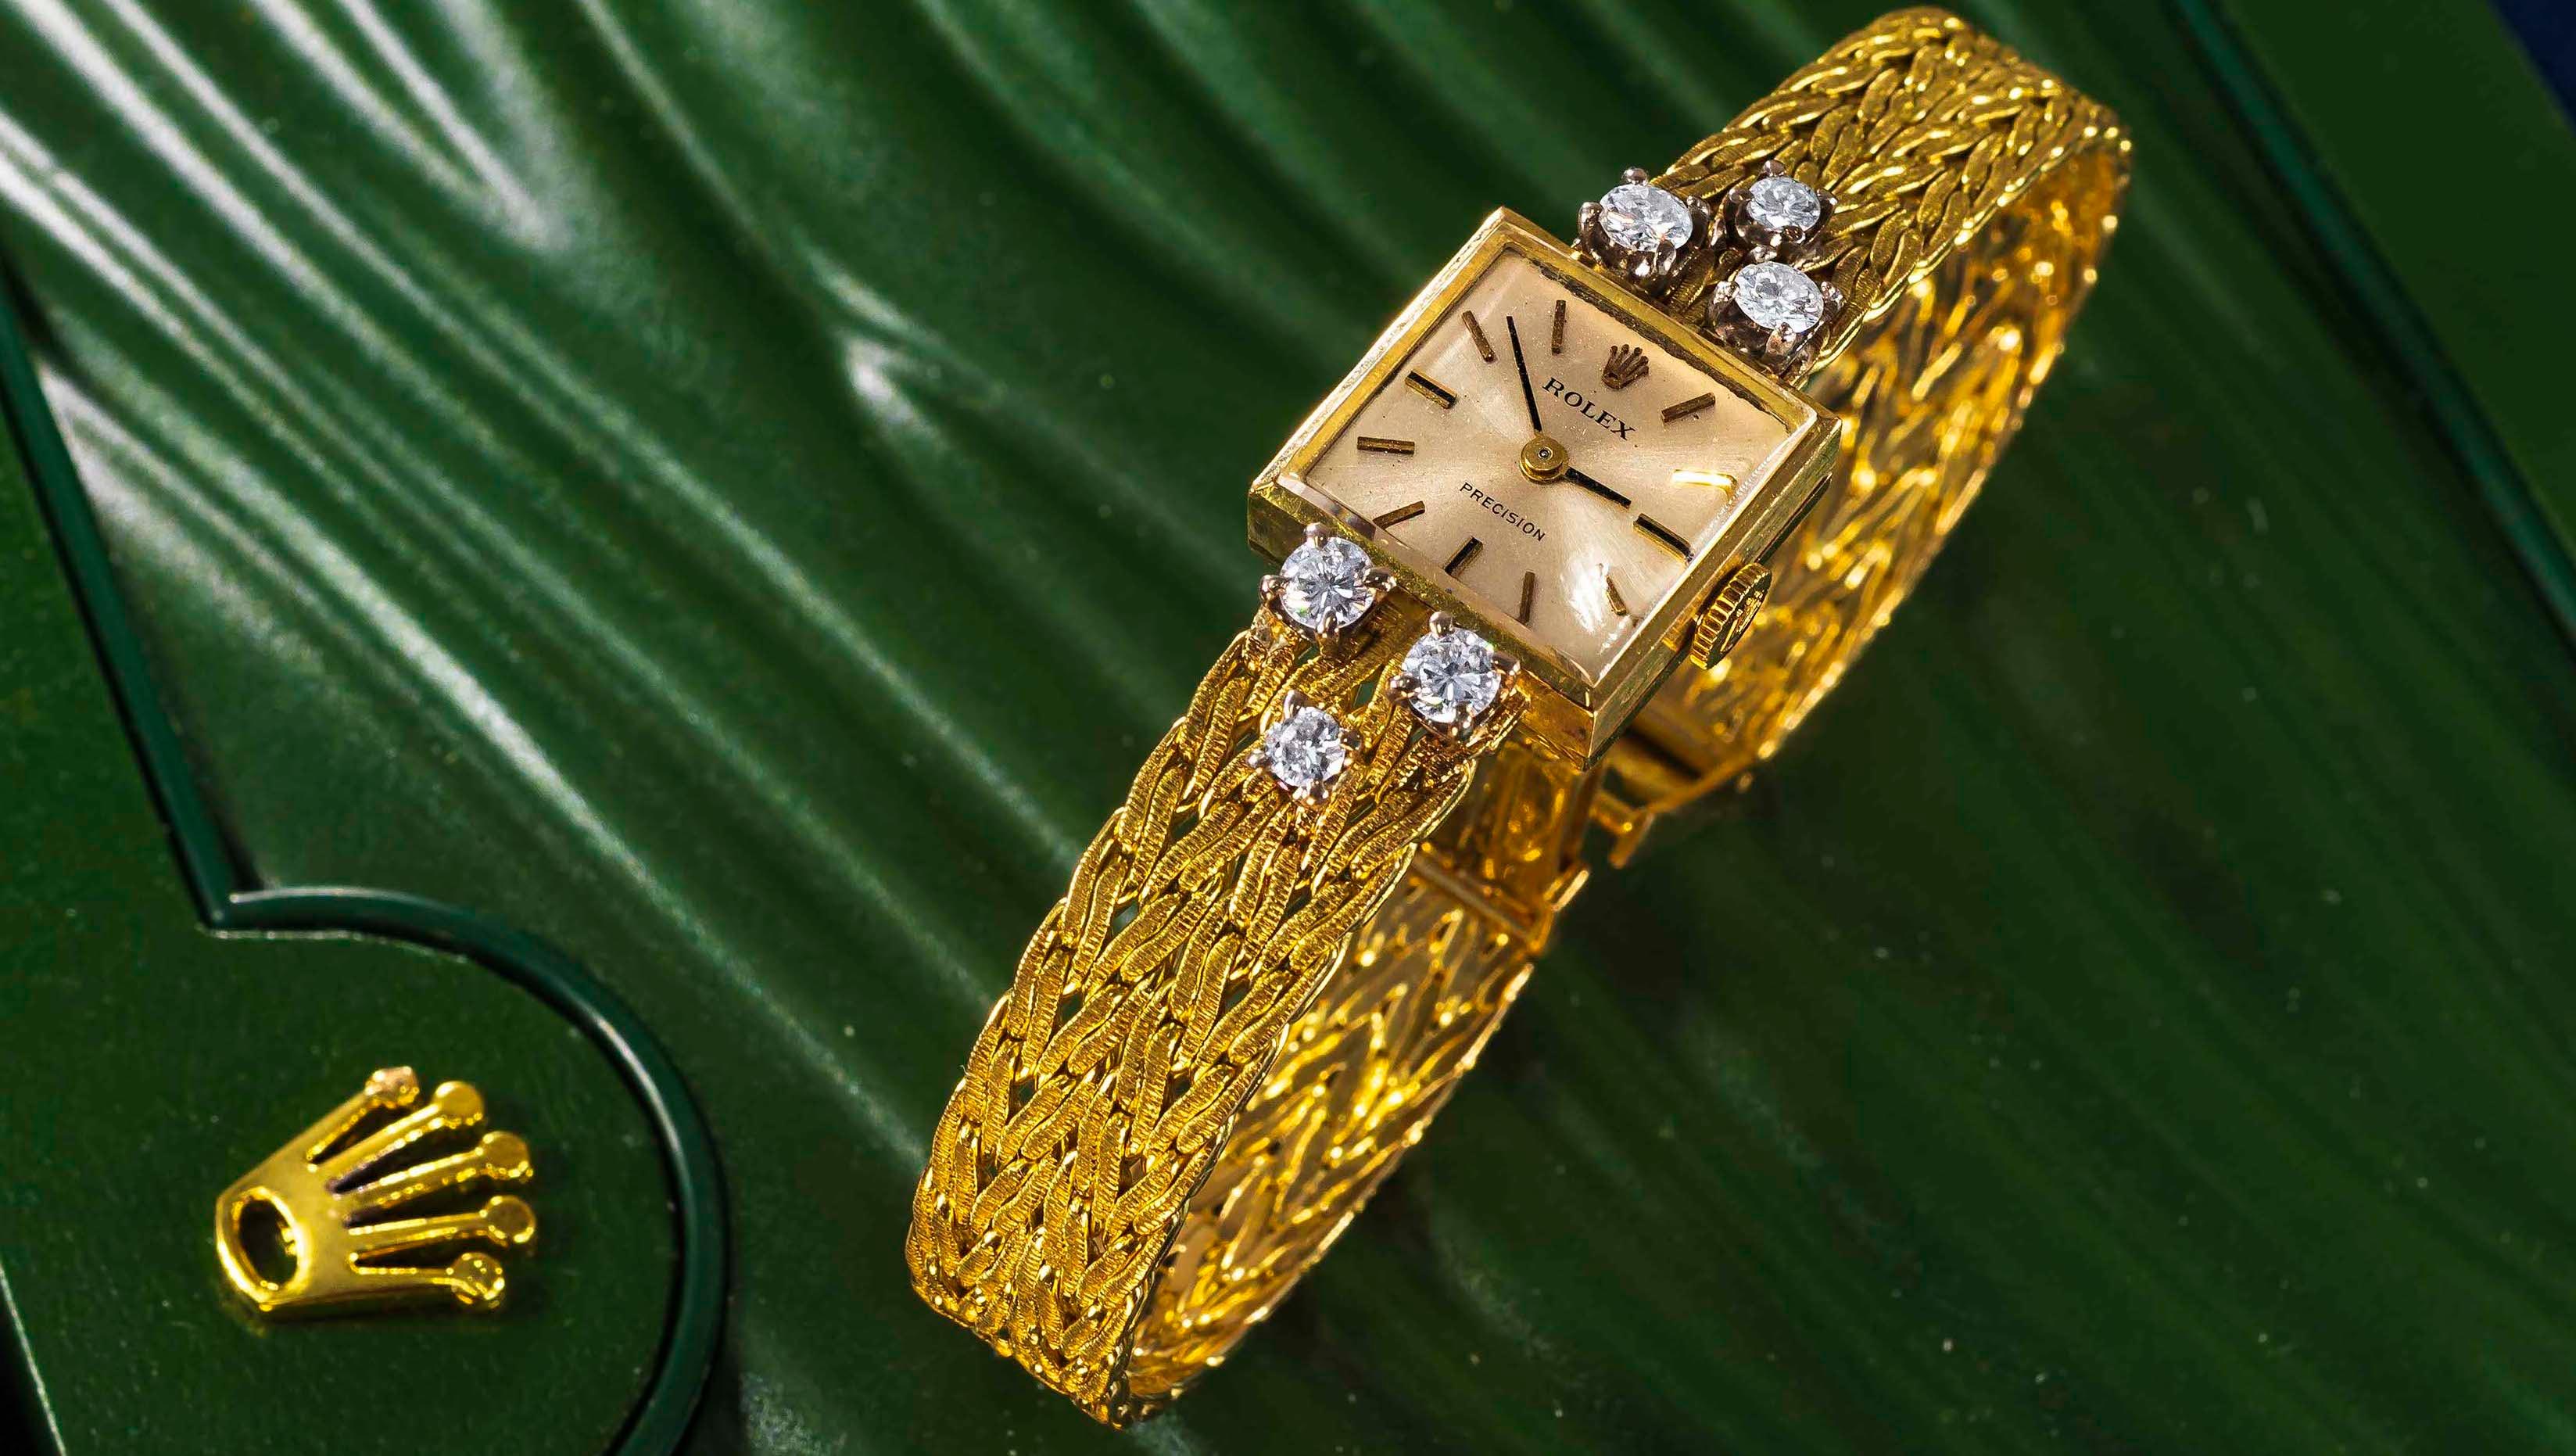 A 1970s Limited Edition High Fashion Rolex 18kt Yellow Gold Diamond Set Foliate Leaf Design Bracelet Watch

Basic Dimensions & Specifications
- Case Dimensions: 18mm across x 18mm top
- Wrist Size Fits up to 175mm Wrist
*Can be extended or shortened